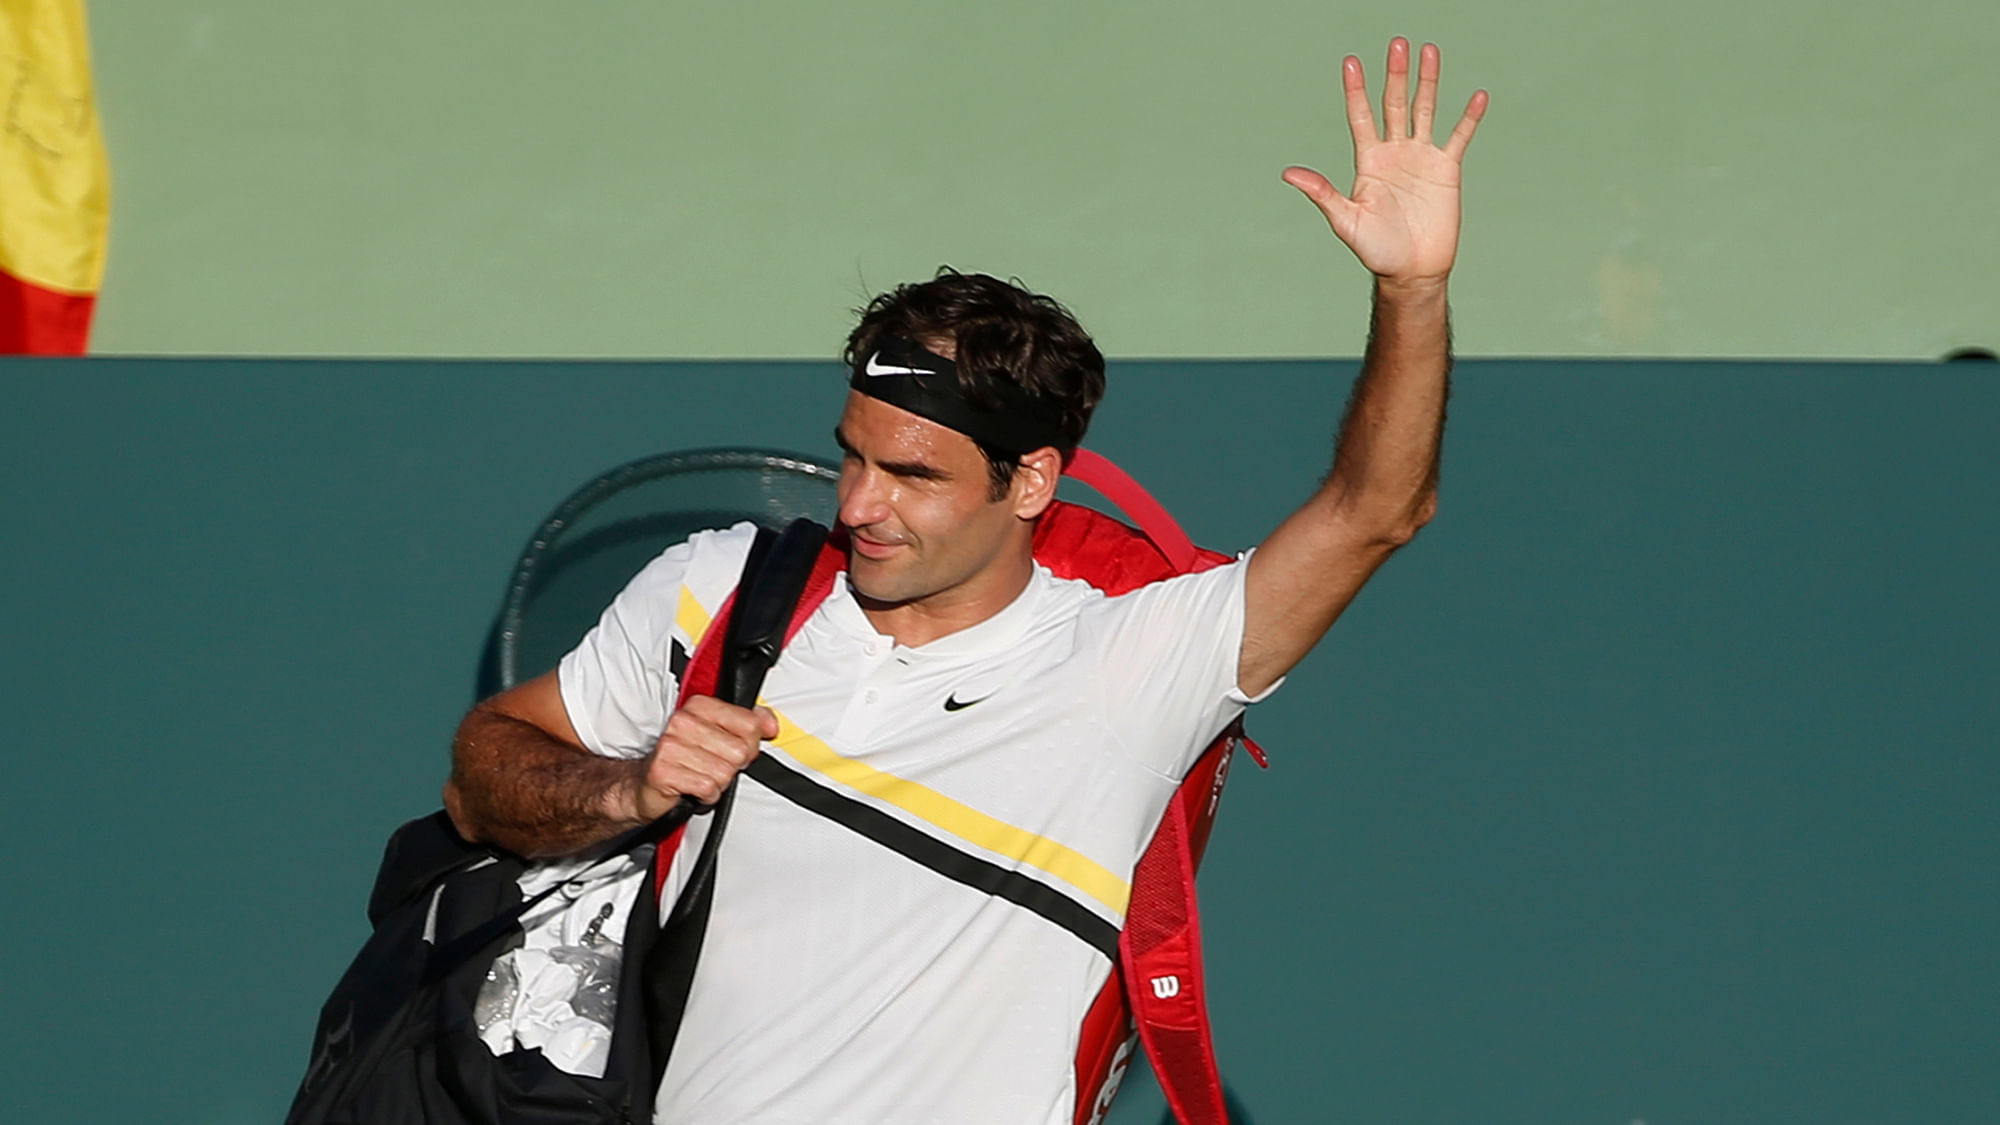 Roger Federer, of Switzerland, waves to the crowd after Thanasi Kokkinakis, of Australia, defeated him in a tennis match at the Miami Open, Saturday, March 24, 2018, in Key Biscayne, Fla.